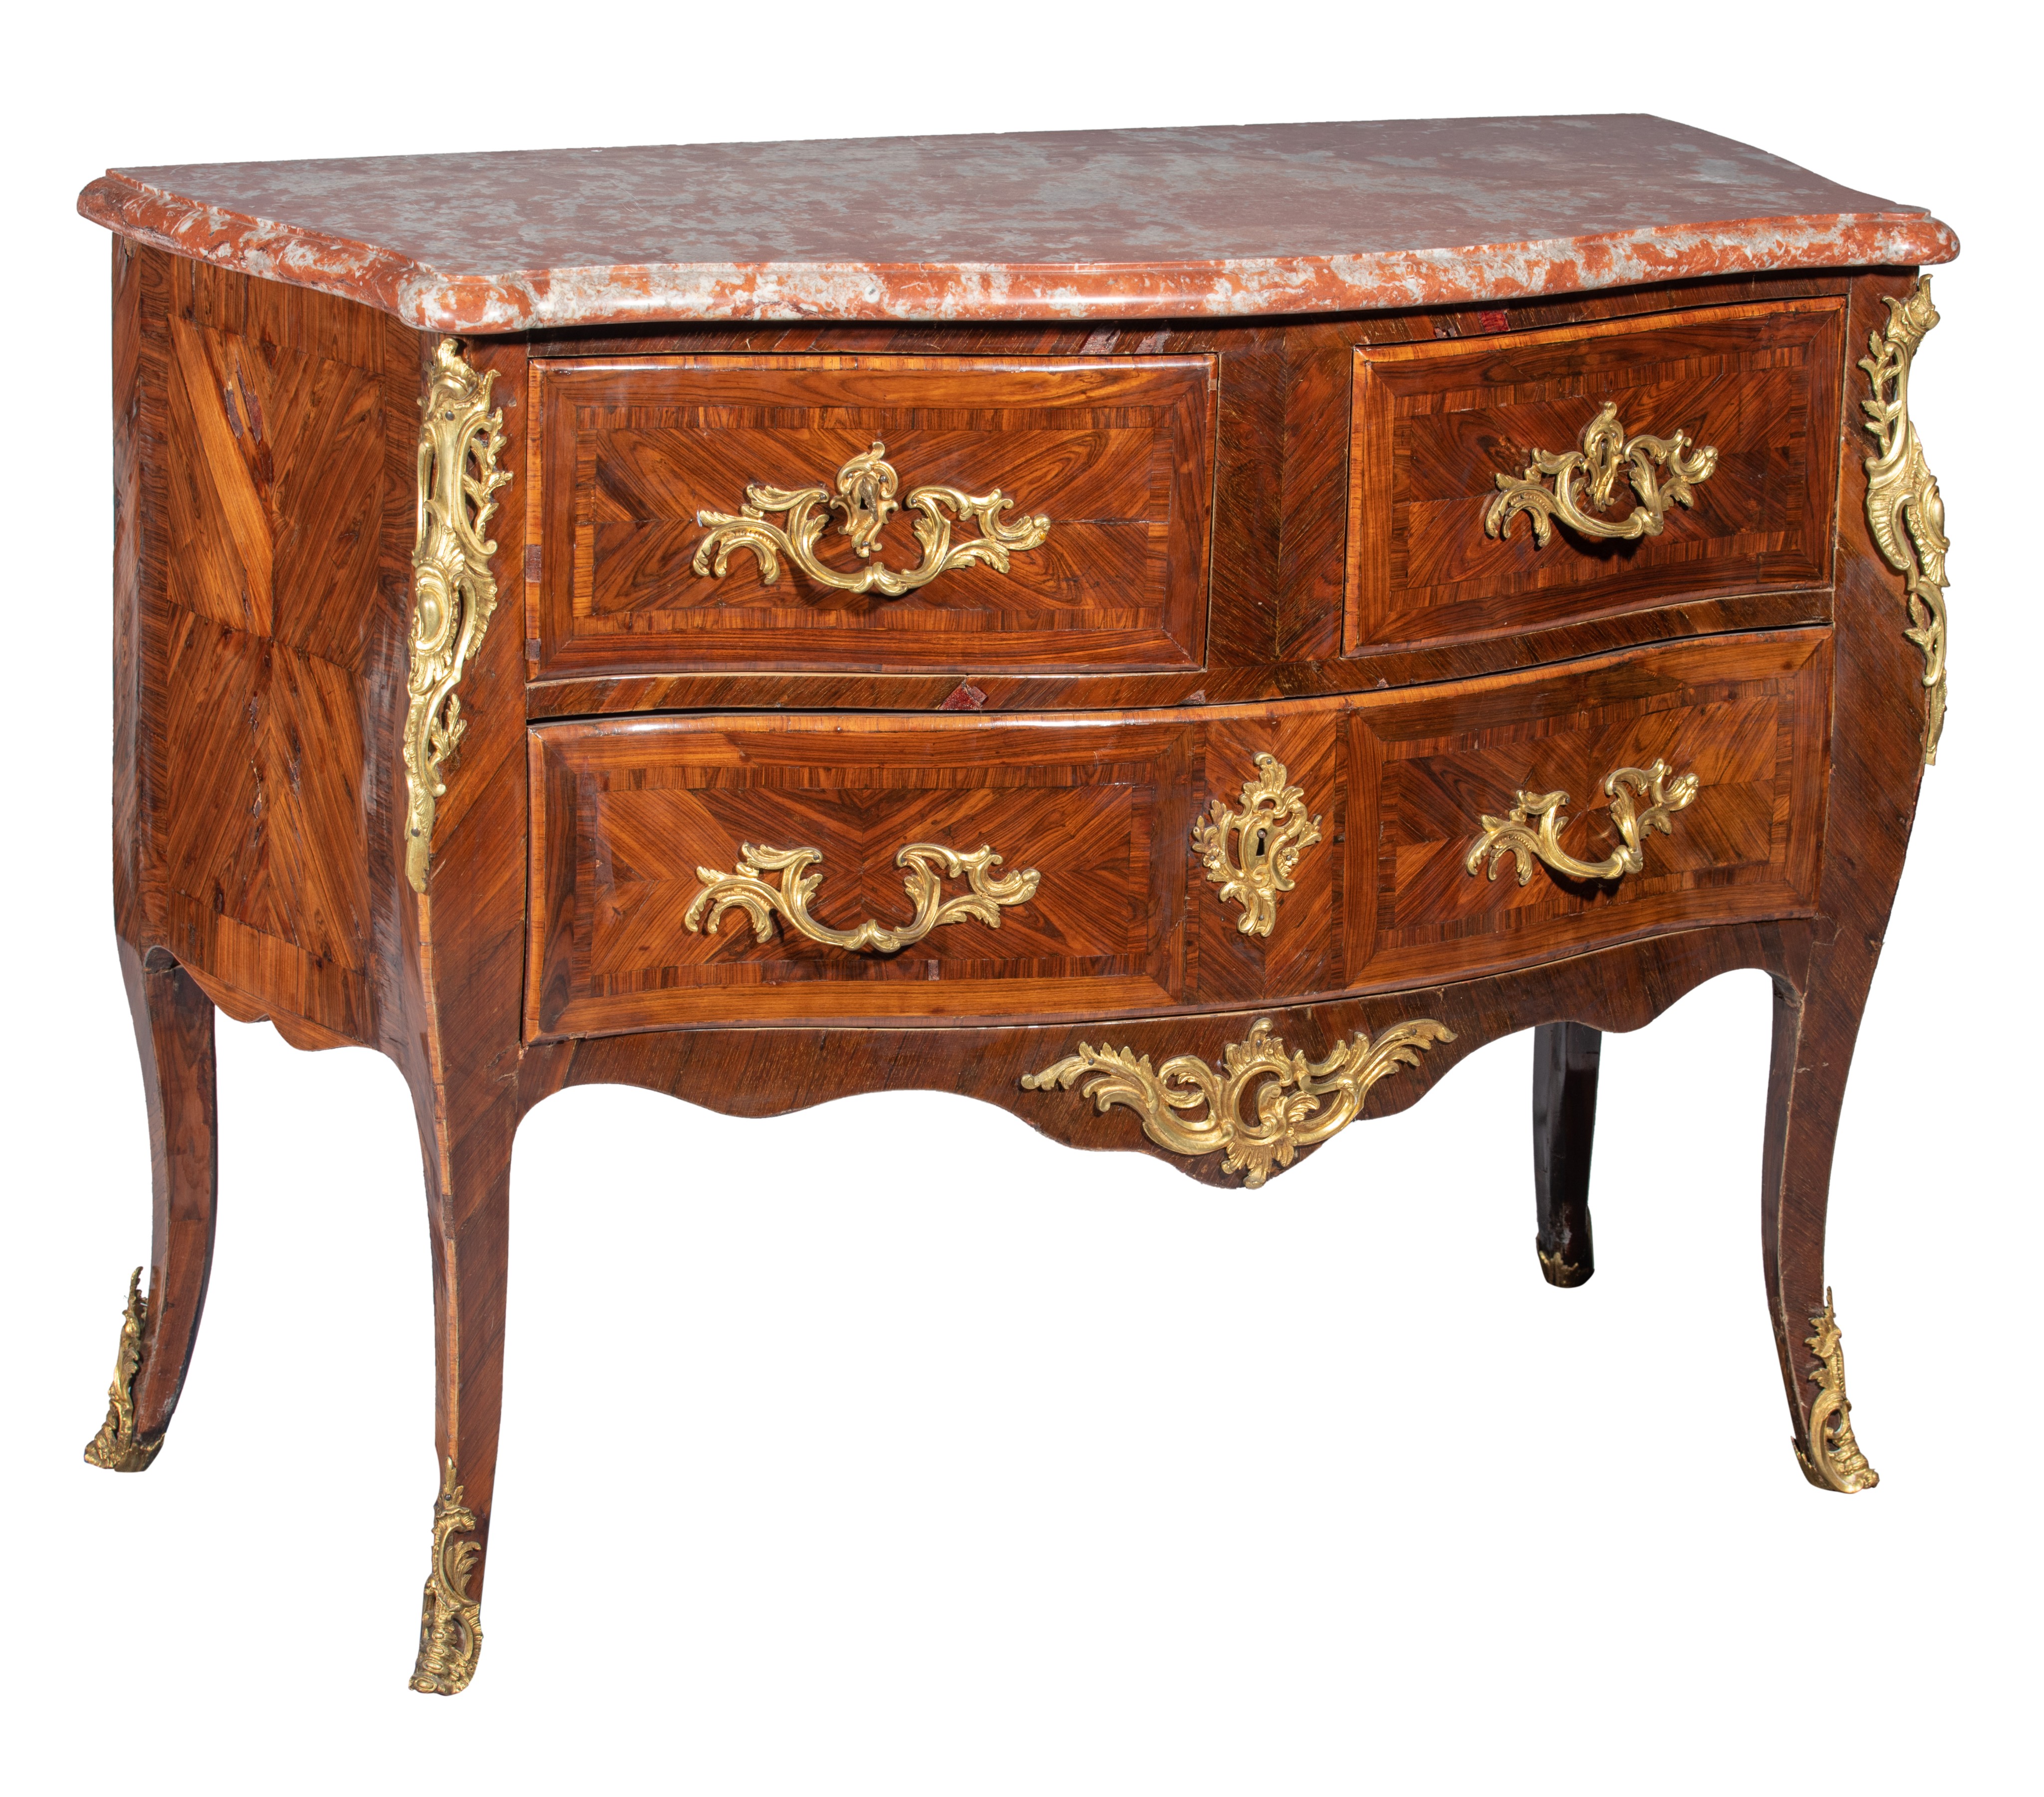 A fine Louis XV period rosewood veneered commode, mid 18thC, H 84 - W 114 - D 55 cm